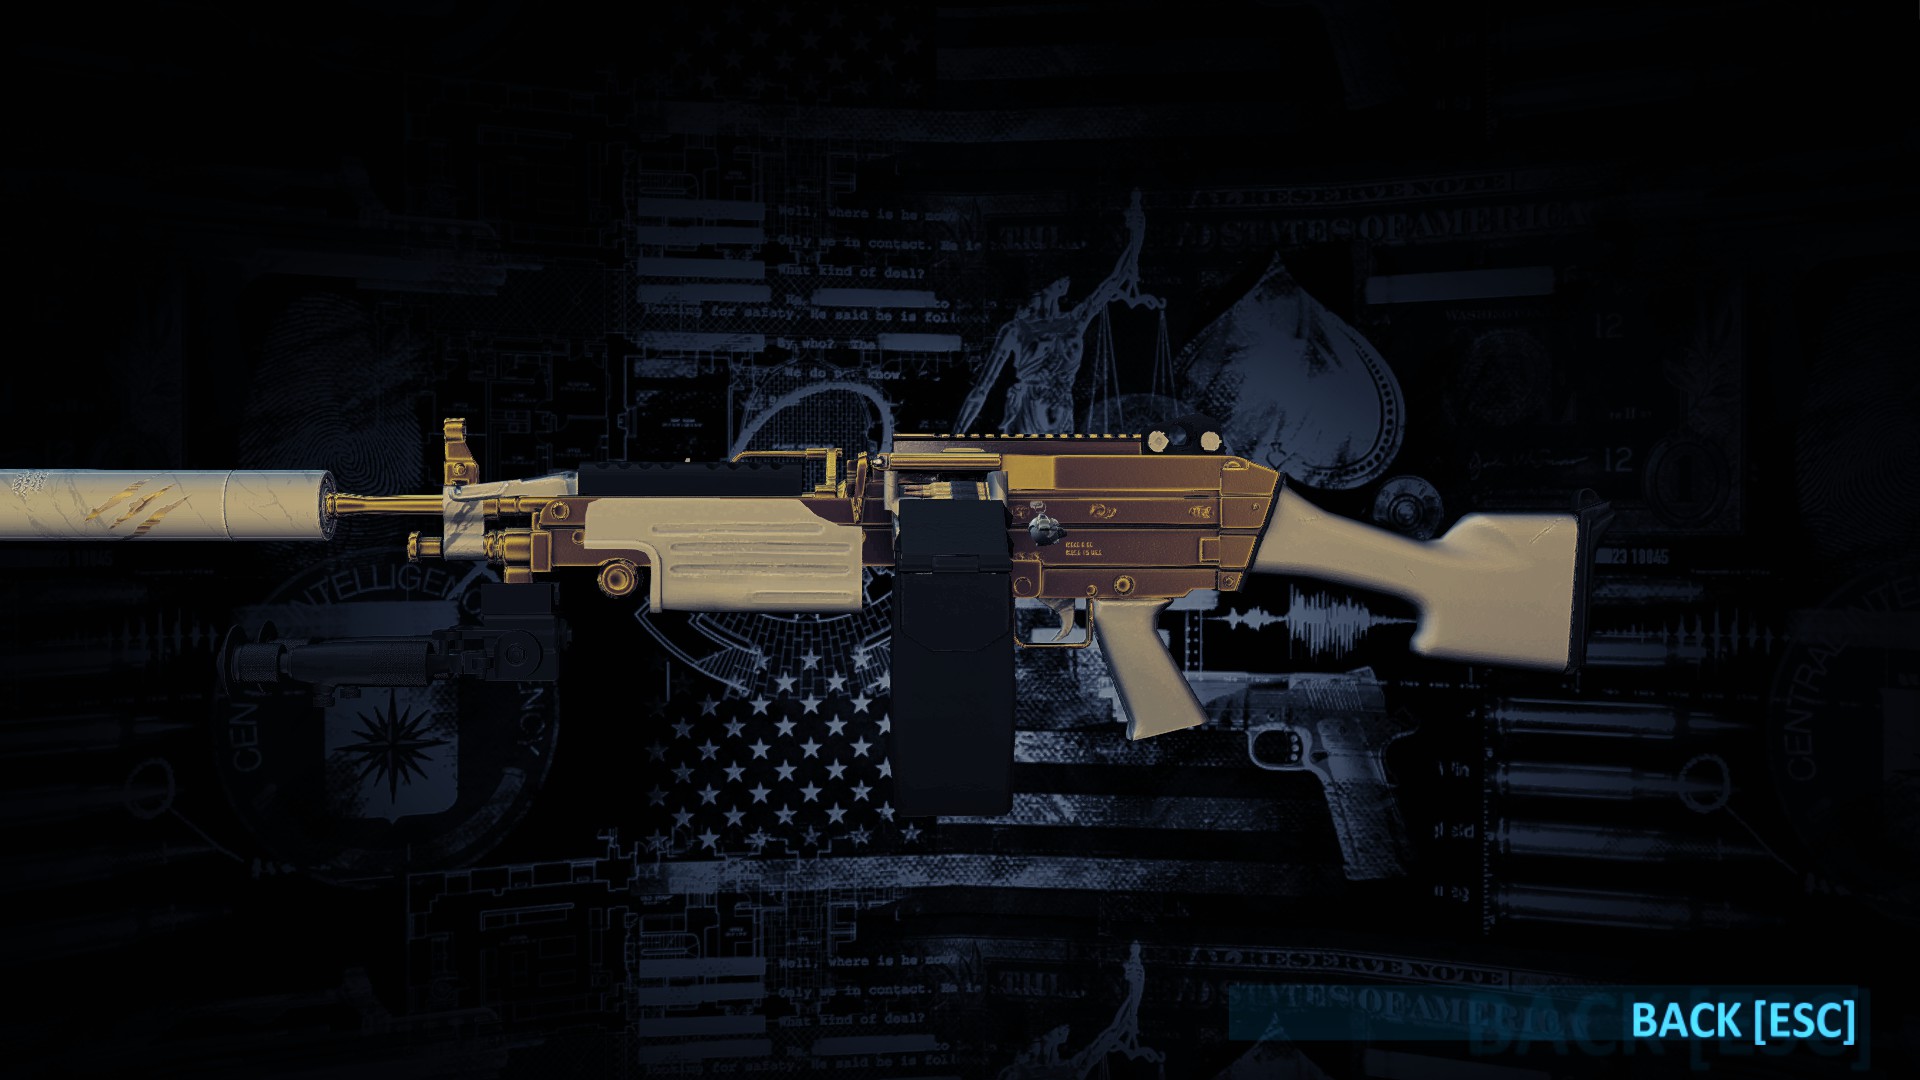 PAYDAY 2 Best Build for Sicario - Weapon Attachments - Sicario Lmg + Spoon - C4A5568